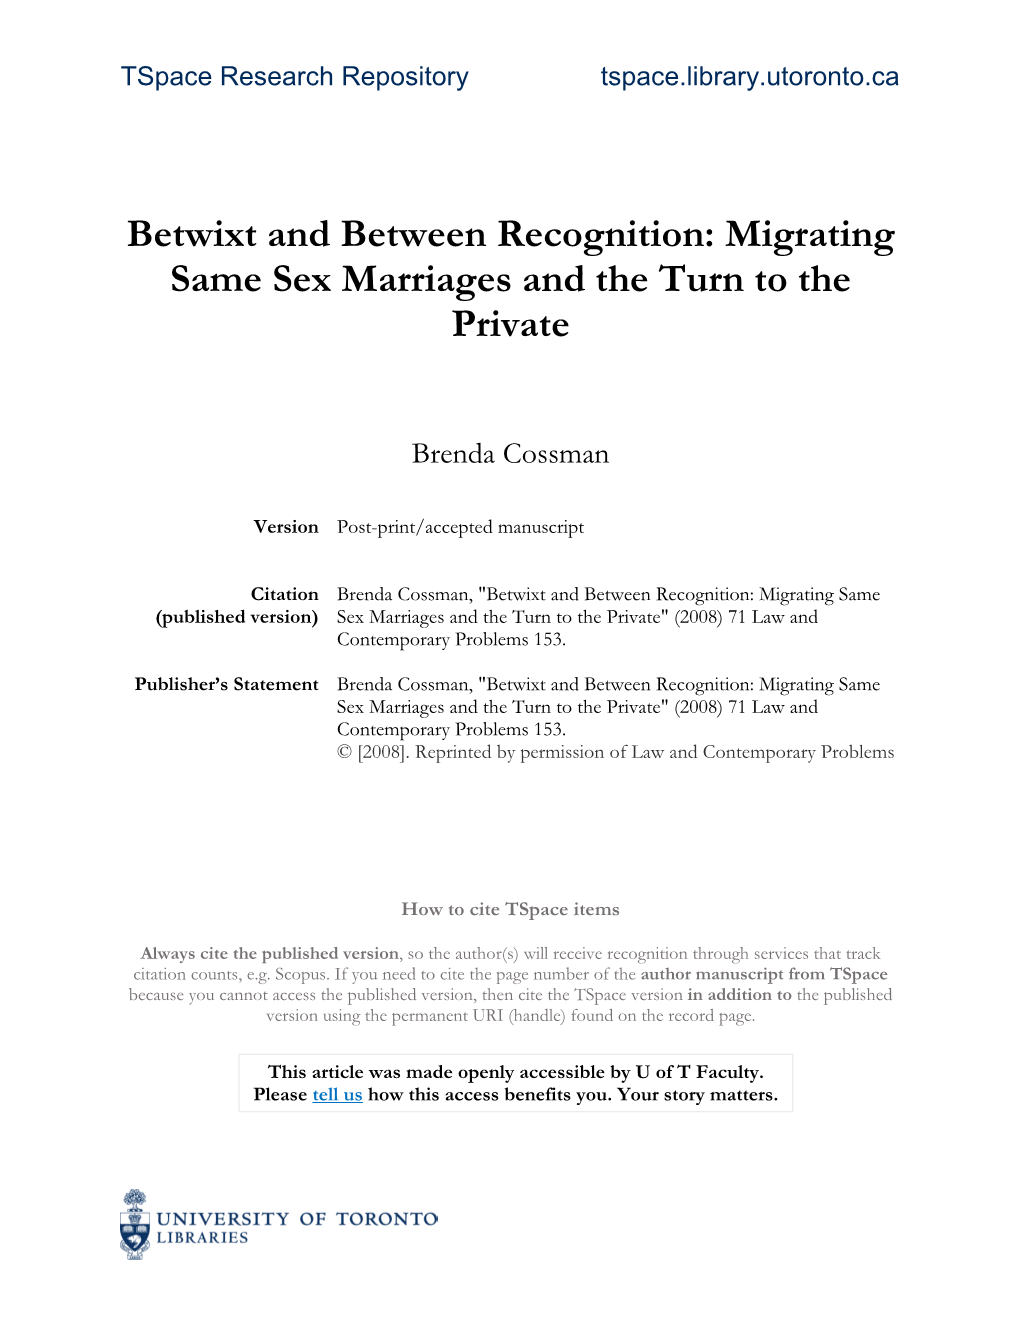 Betwixt and Between Recognition: Migrating Same Sex Marriages and the Turn to the Private